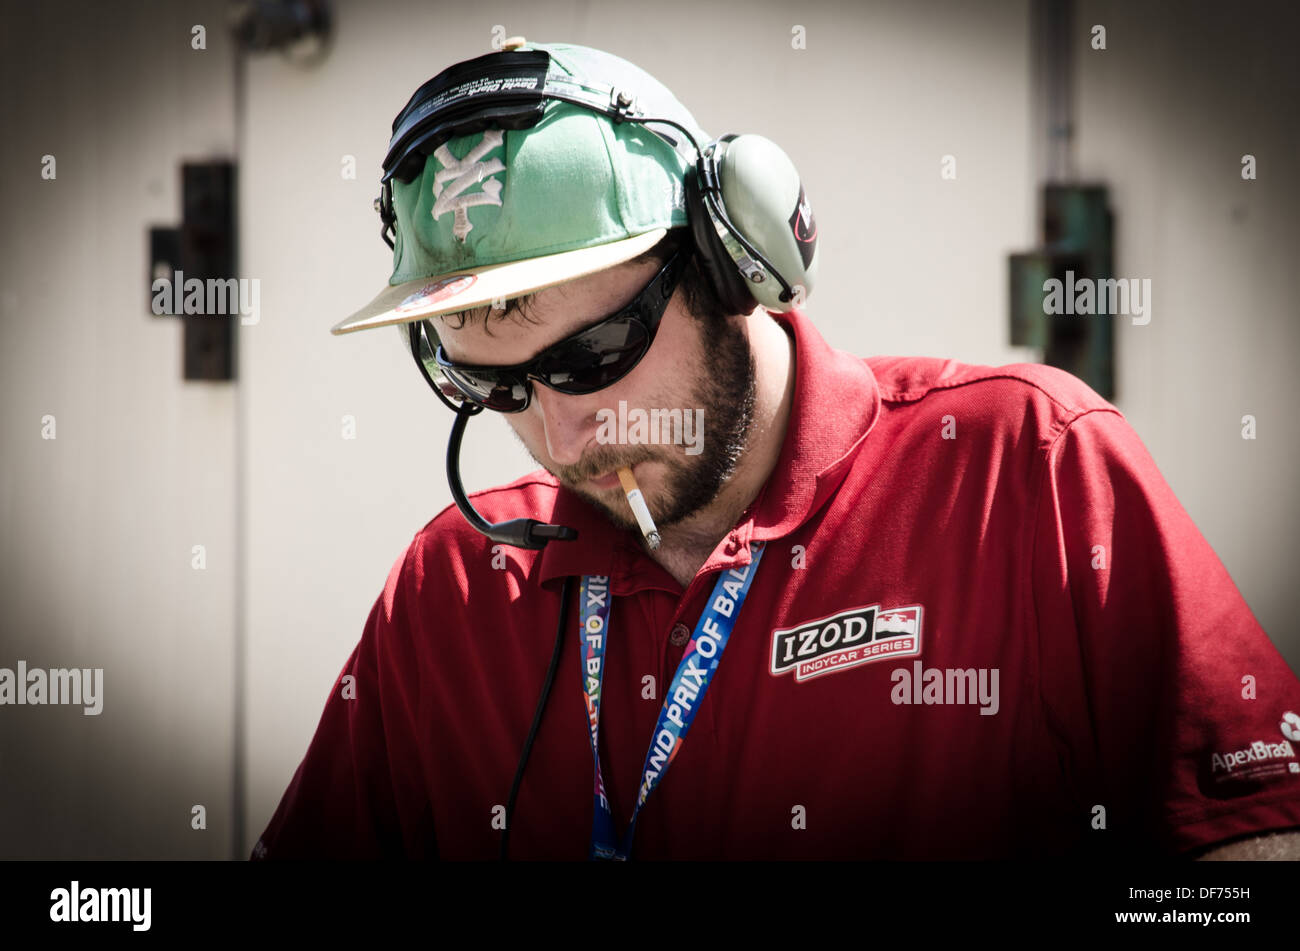 TV Engineer smoking in the pits at the Baltimore Grand Prix Stock Photo